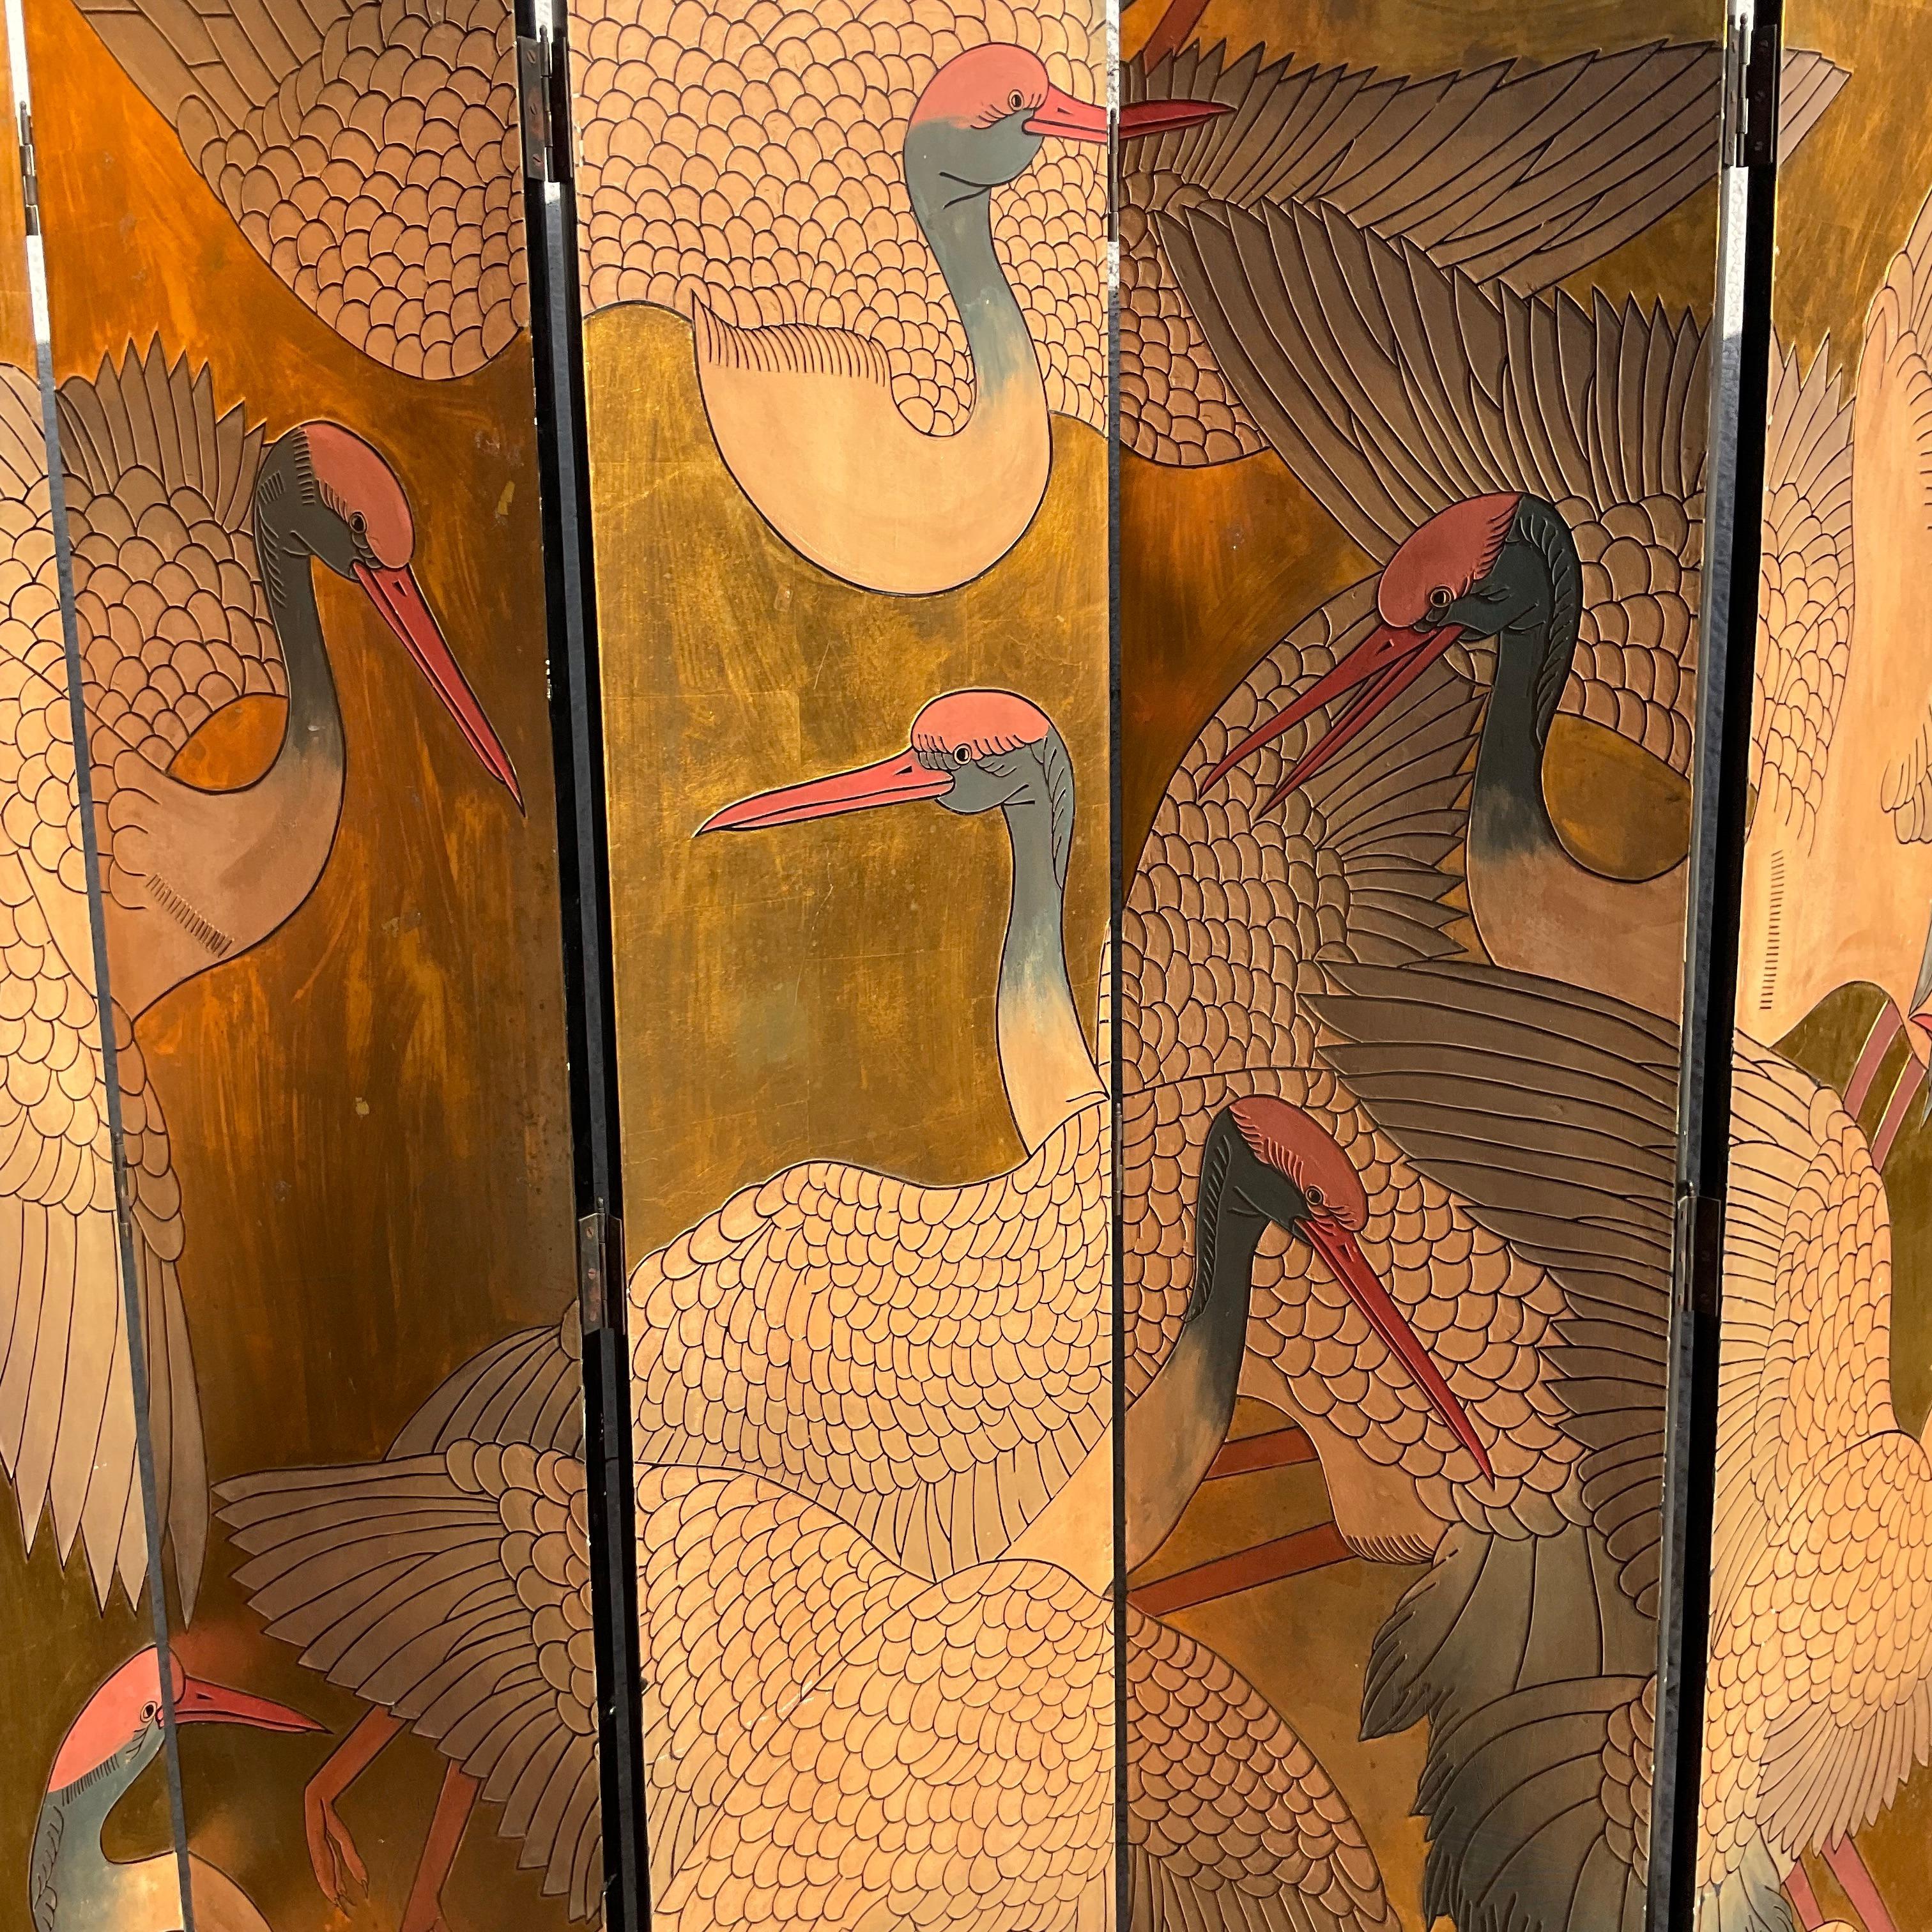 An incredible vintage Asian folding screen. A stunning composition of flying cranes on a brilliant gilt background. Monumental in size and drama. Acquired from a Palm Beach estate.